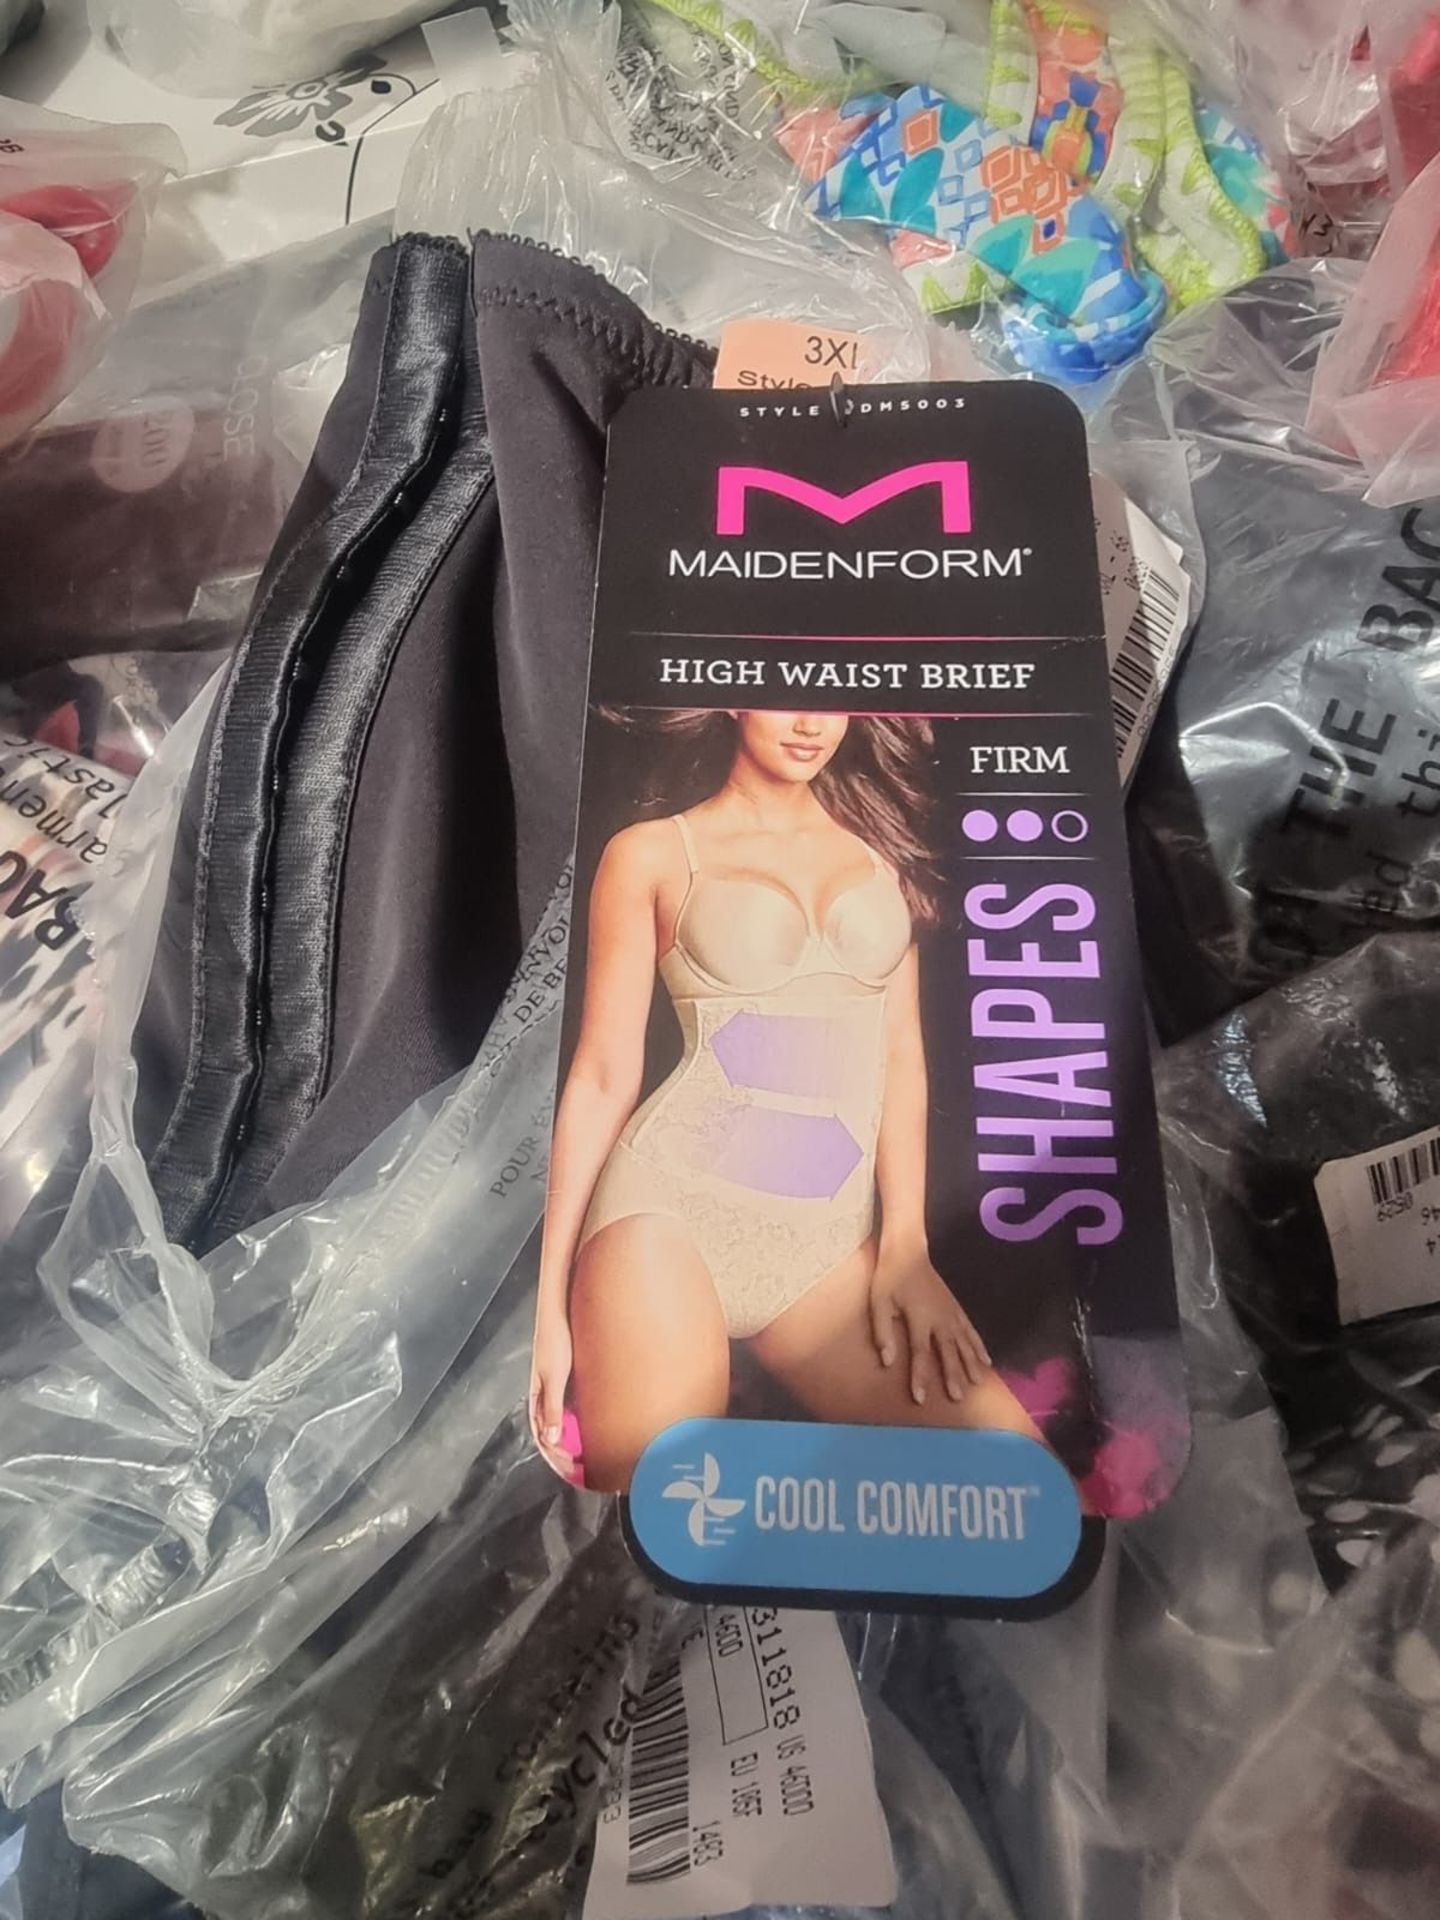 100 x NEW PACKAGED ASSORTED SWIM & UNDERWEAR FROM BRAND SUCH AS WONDERBRA, BOUX AVENUE, ANN SUMMERS, - Image 21 of 53